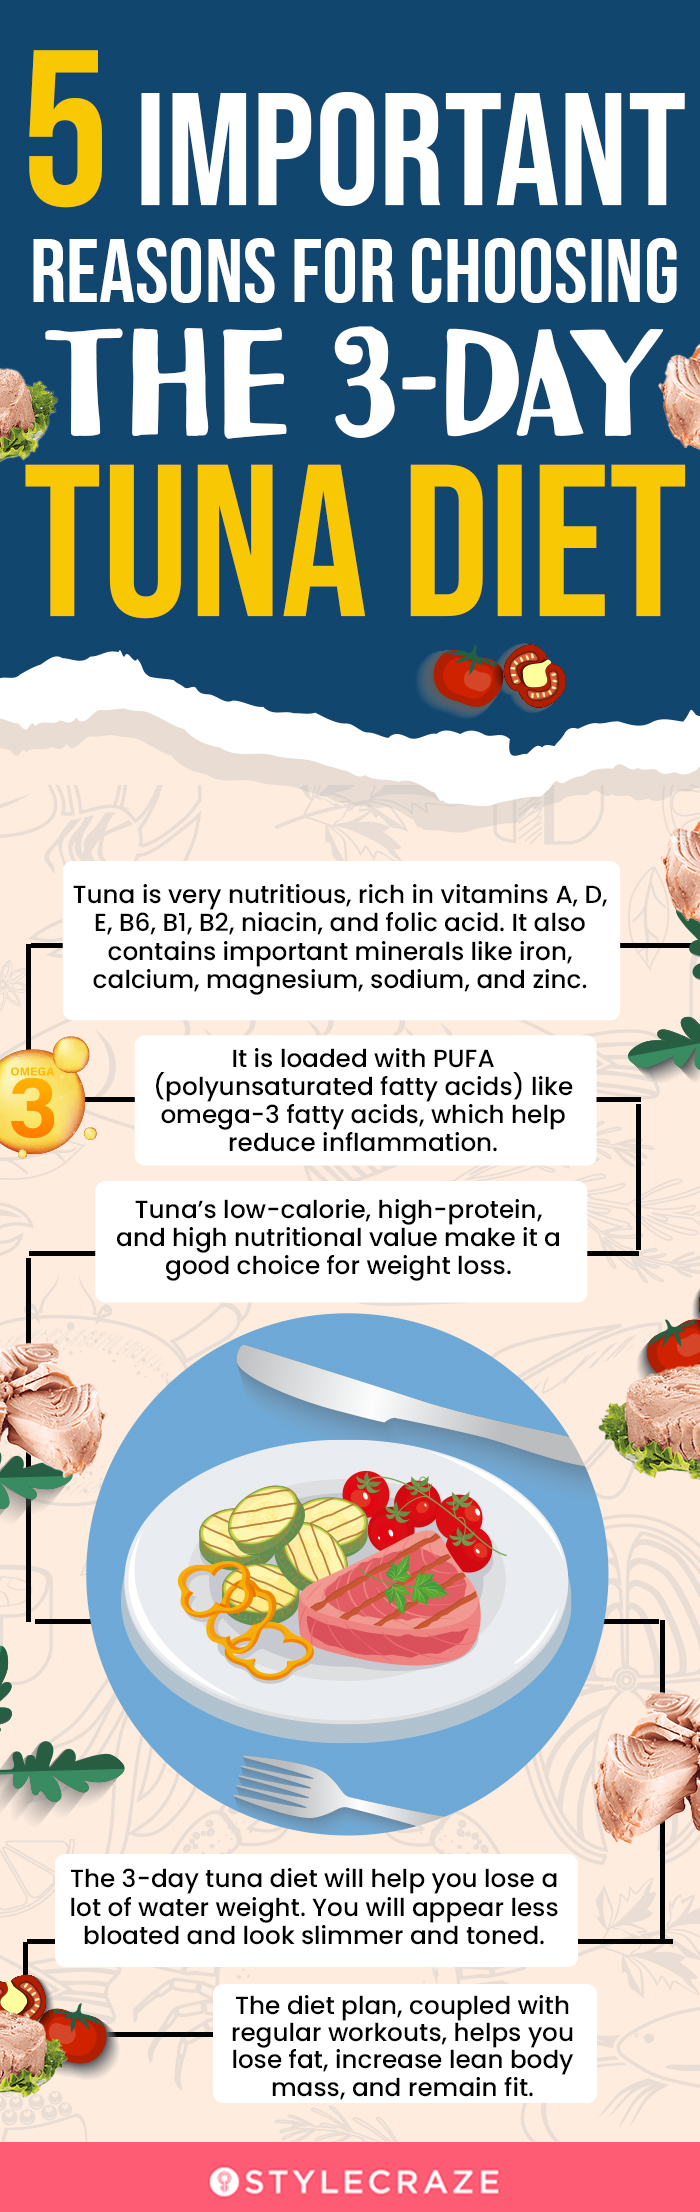 5 important reasonsfor choosing the 3 day tuna diet (infographic)